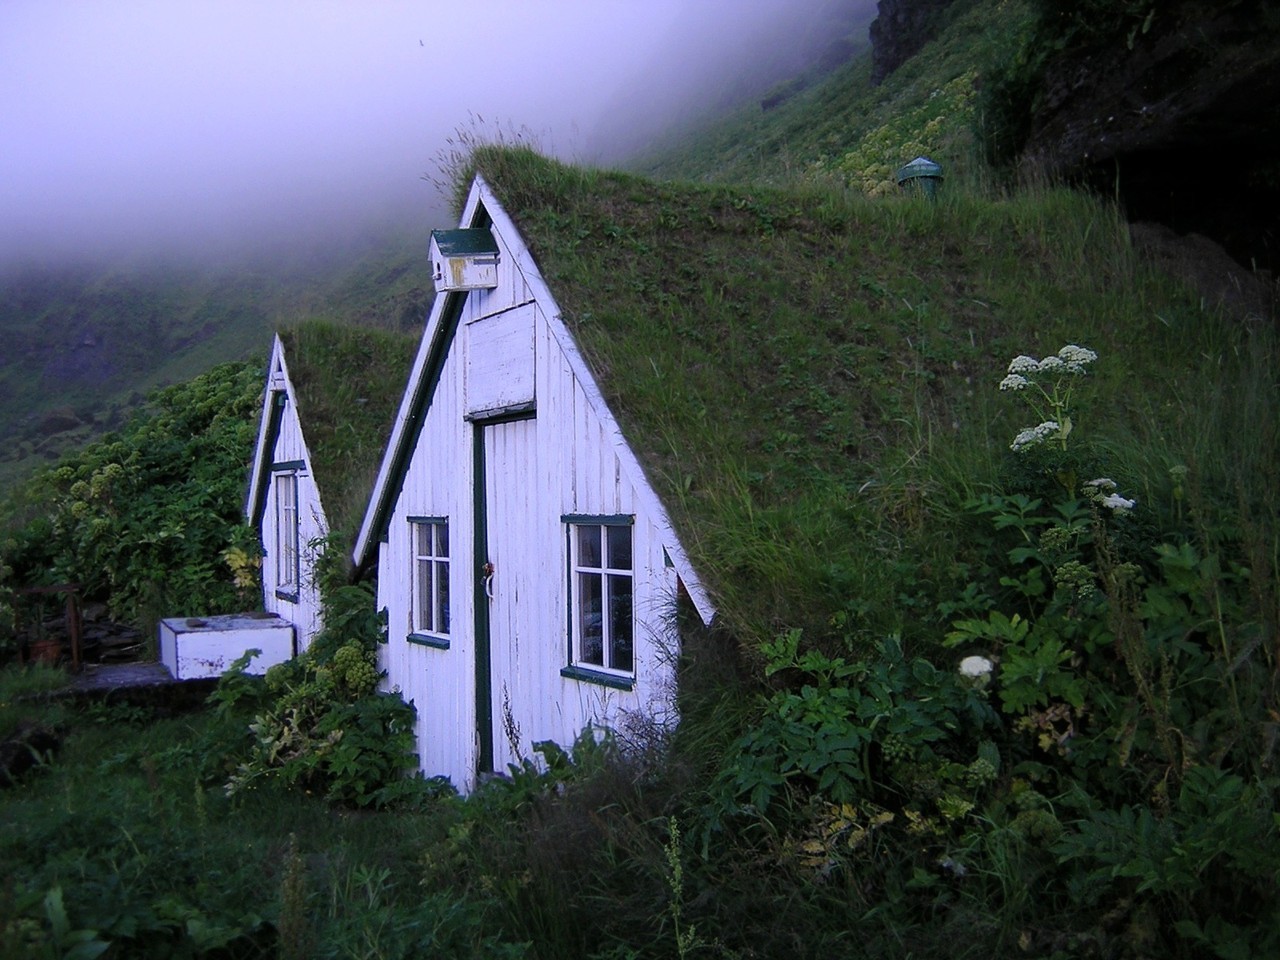 the-absolute-best-photography:  Sod roof houses in Vik, Iceland